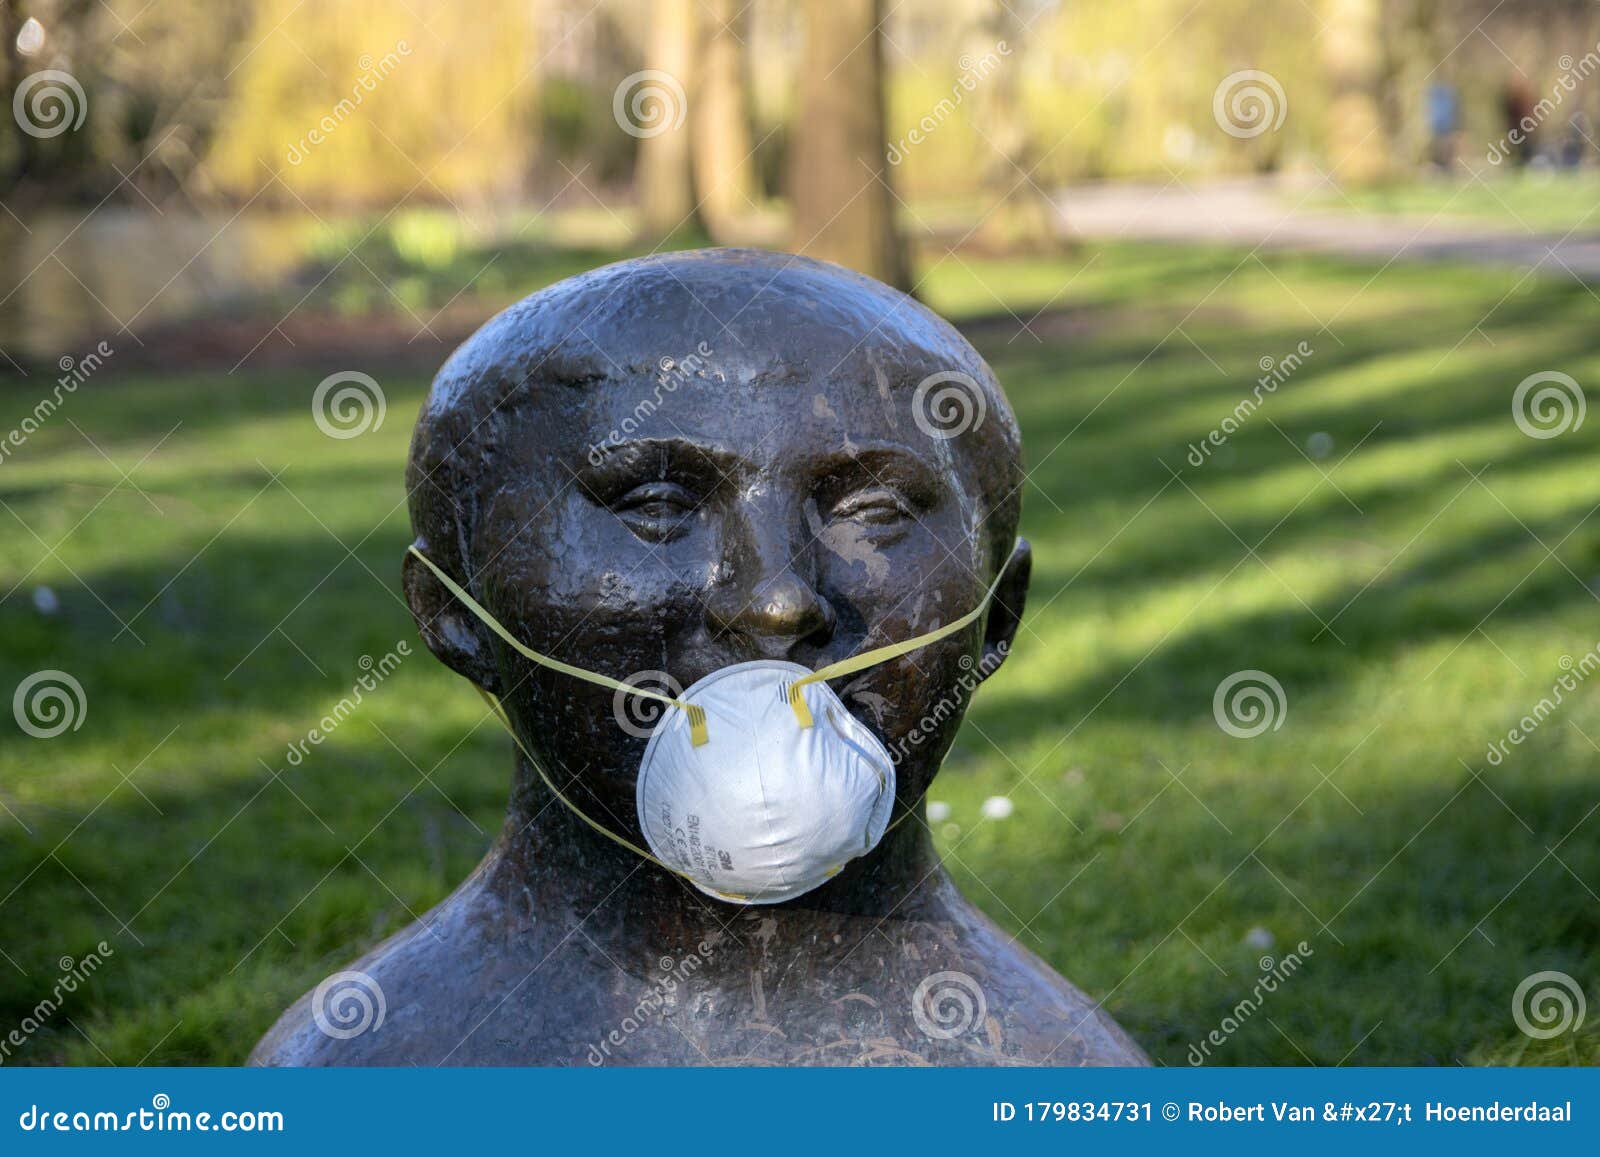 gedragen vonnis Lagere school Statue Bolgewas from Paul Koning at the Oosterpark at Amsterdam East the  Netherlands during the Coronavirus Outbreak 2020 Editorial Photo - Image of  europe, outdoor: 179834731